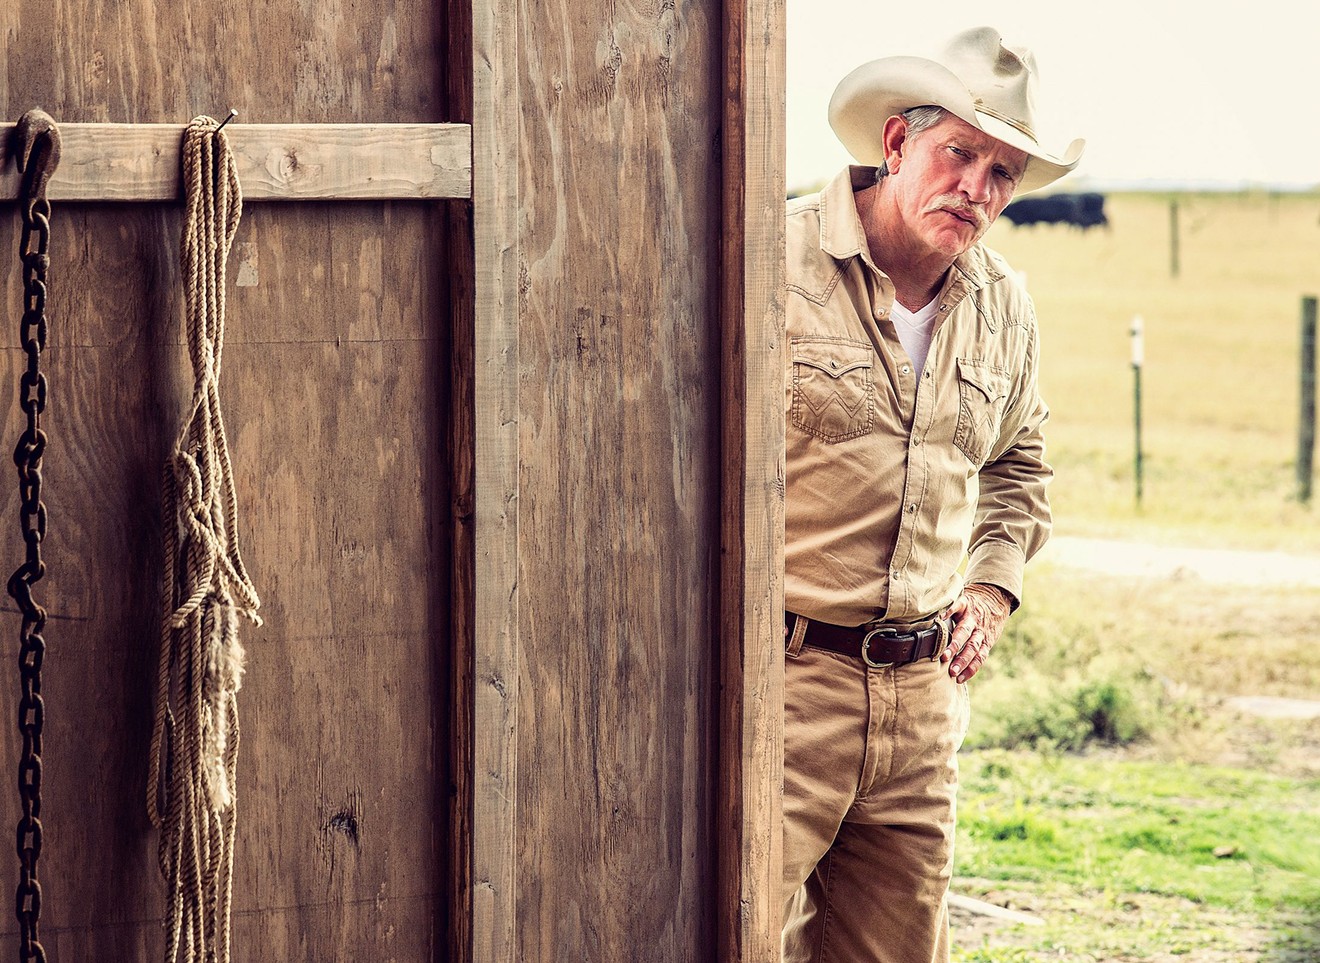 Thomas Haden Church plays a rugged Texan in his new film — a role for which he was born and raised.